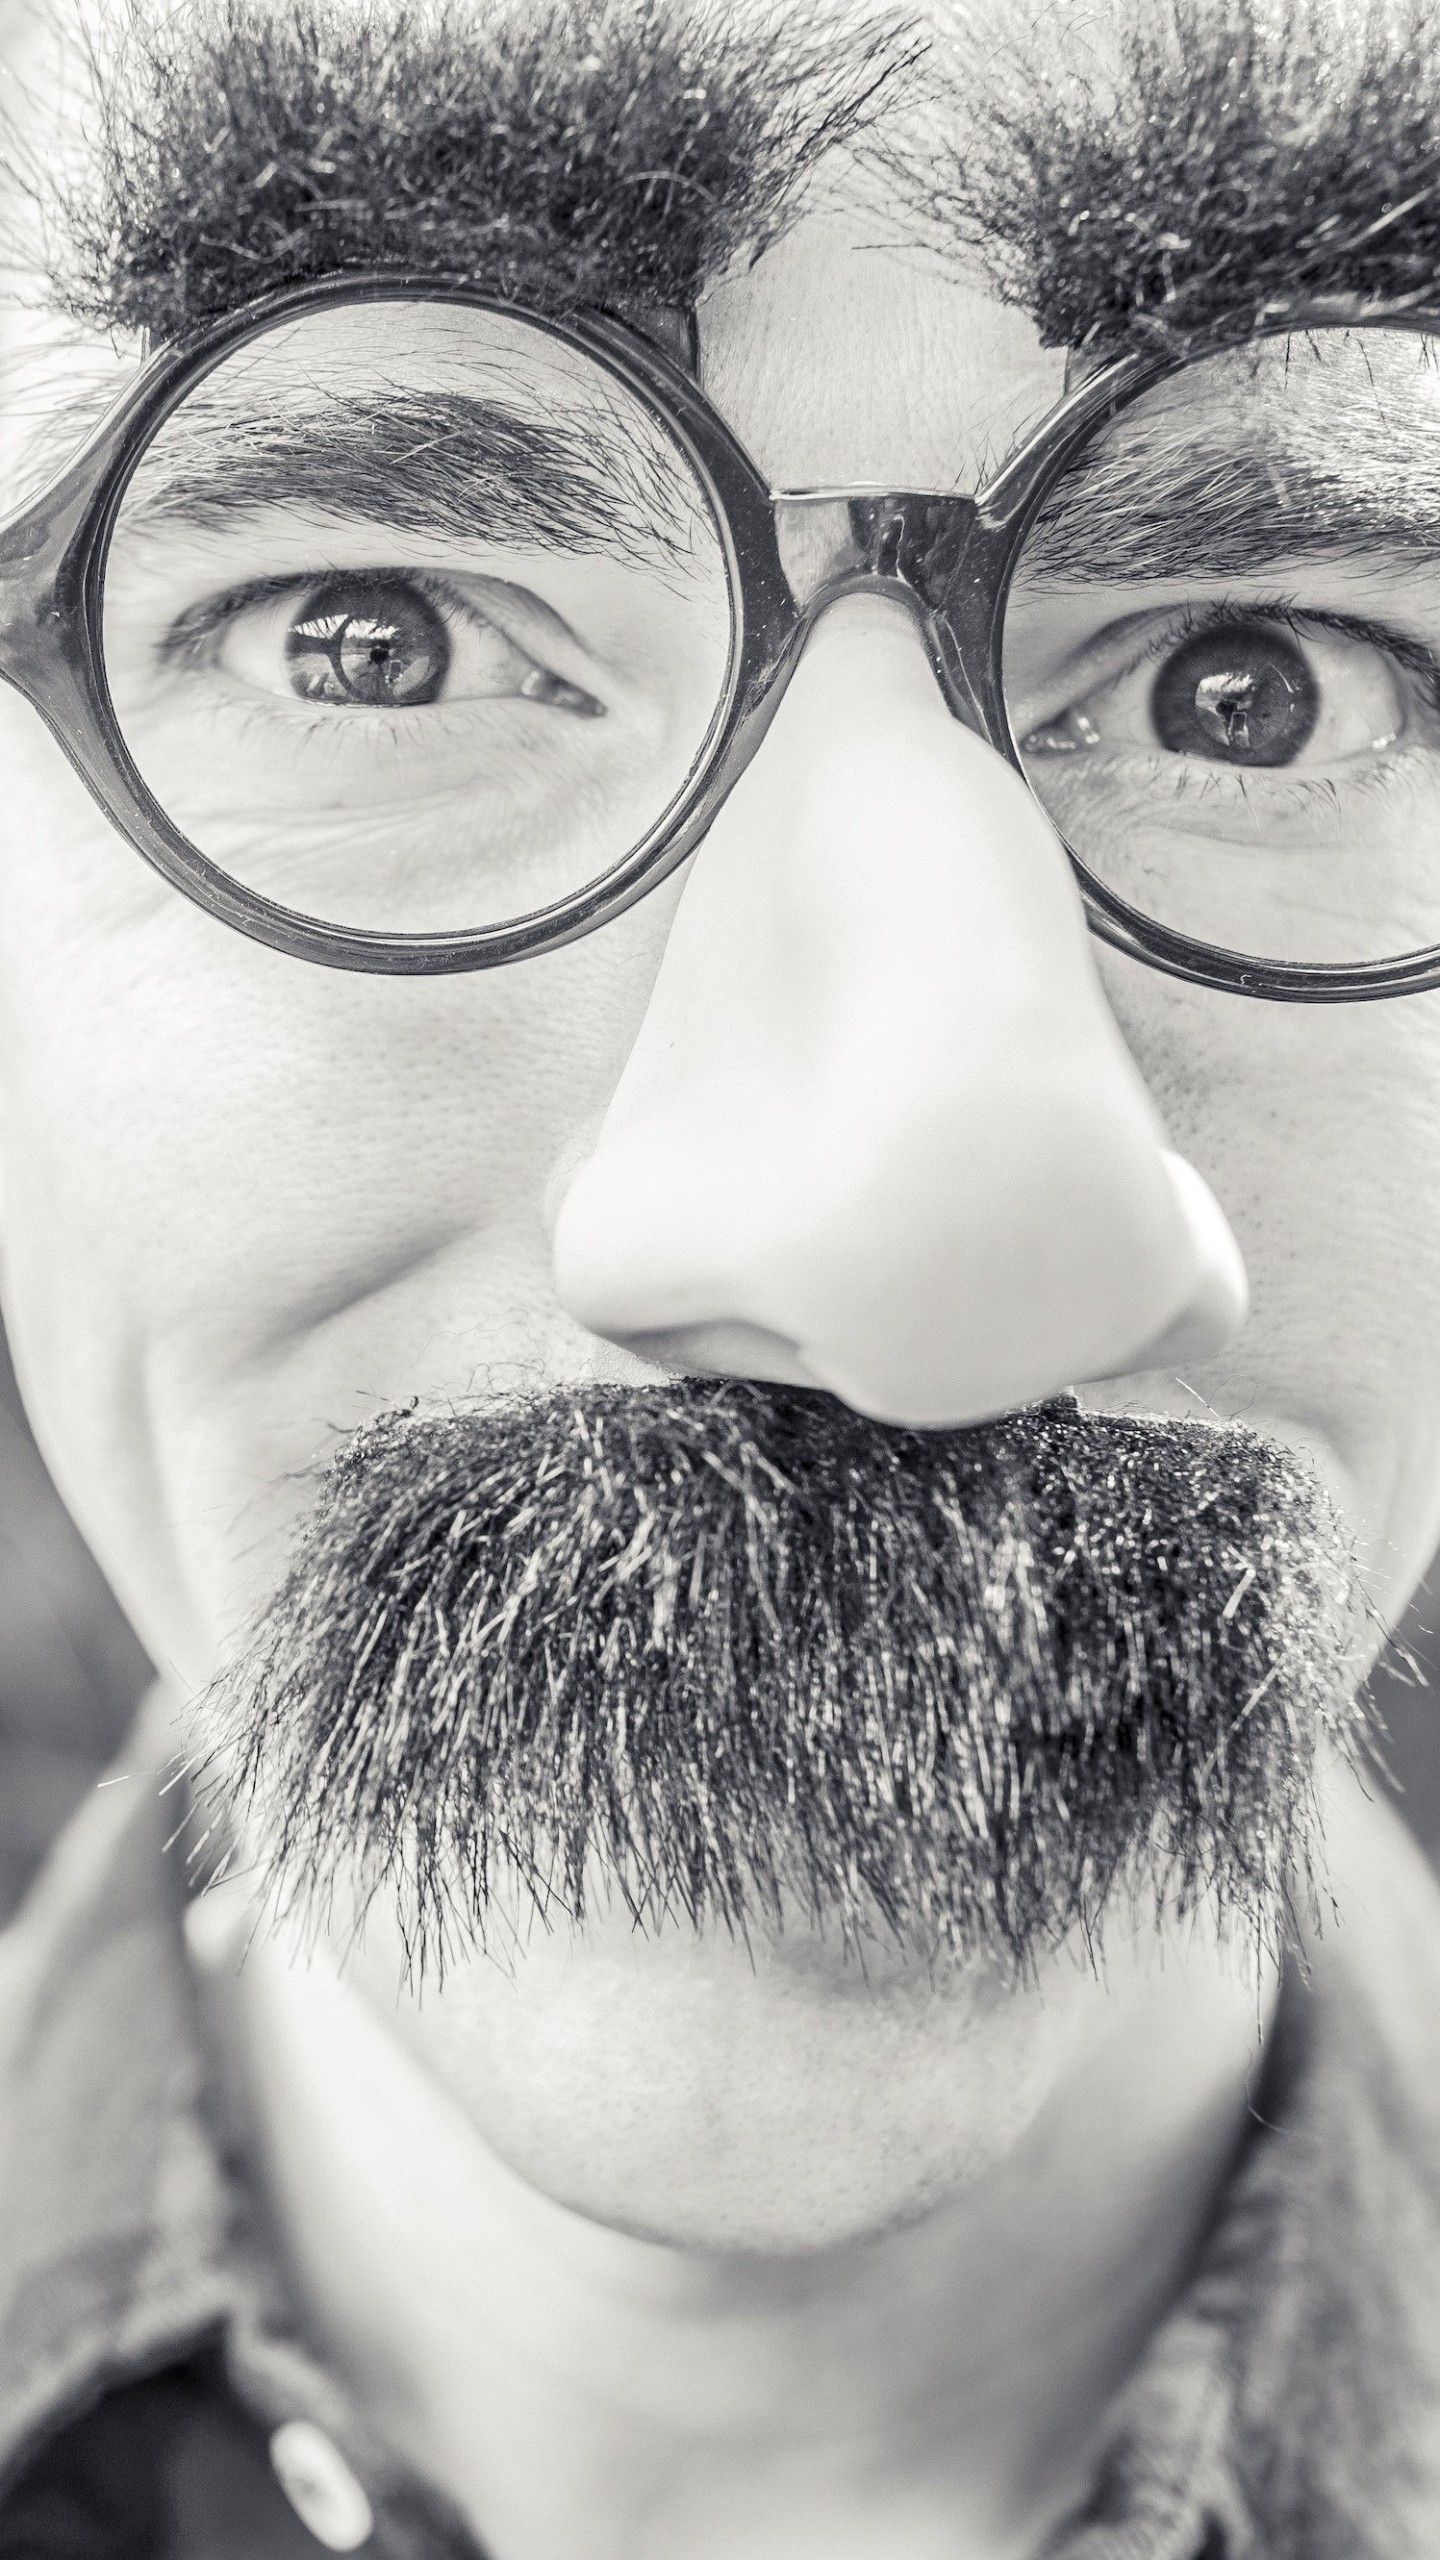 Groucho Glasses Man Wallpaper for SAMSUNG Galaxy Note 4